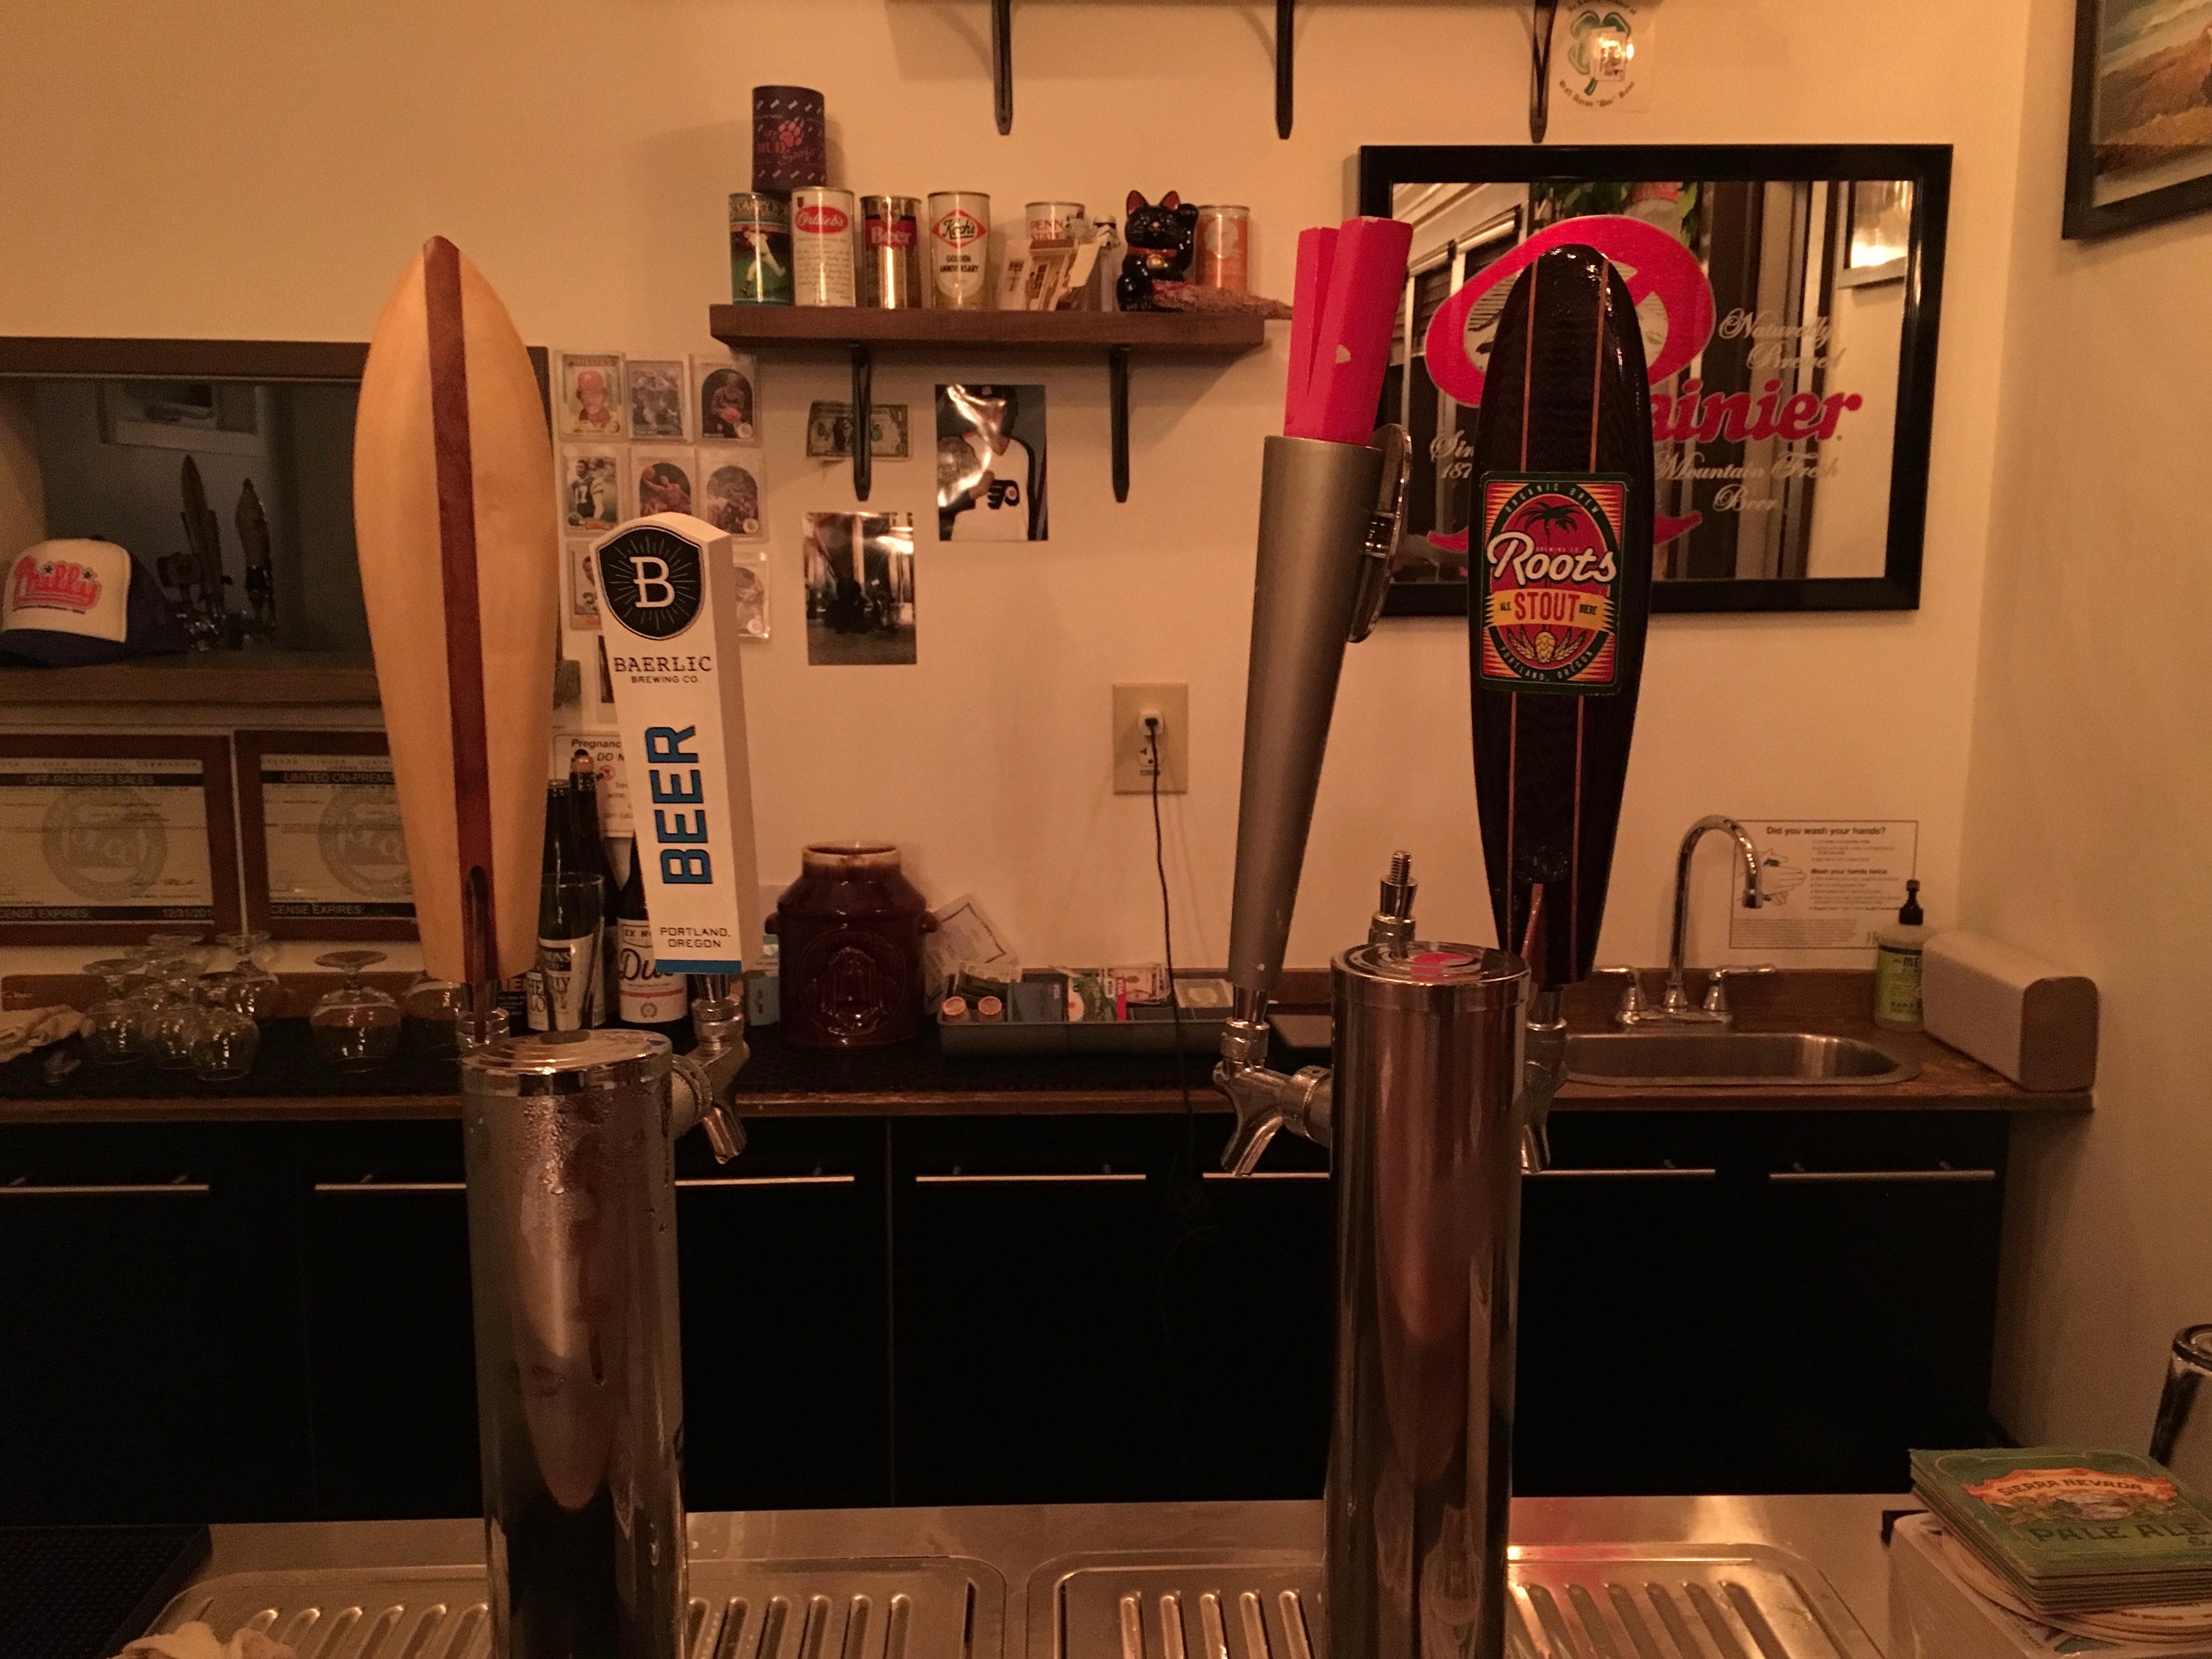 Brian Koch shows his roots in the Portland beer business with some vintage Roots Brewing tap handles.